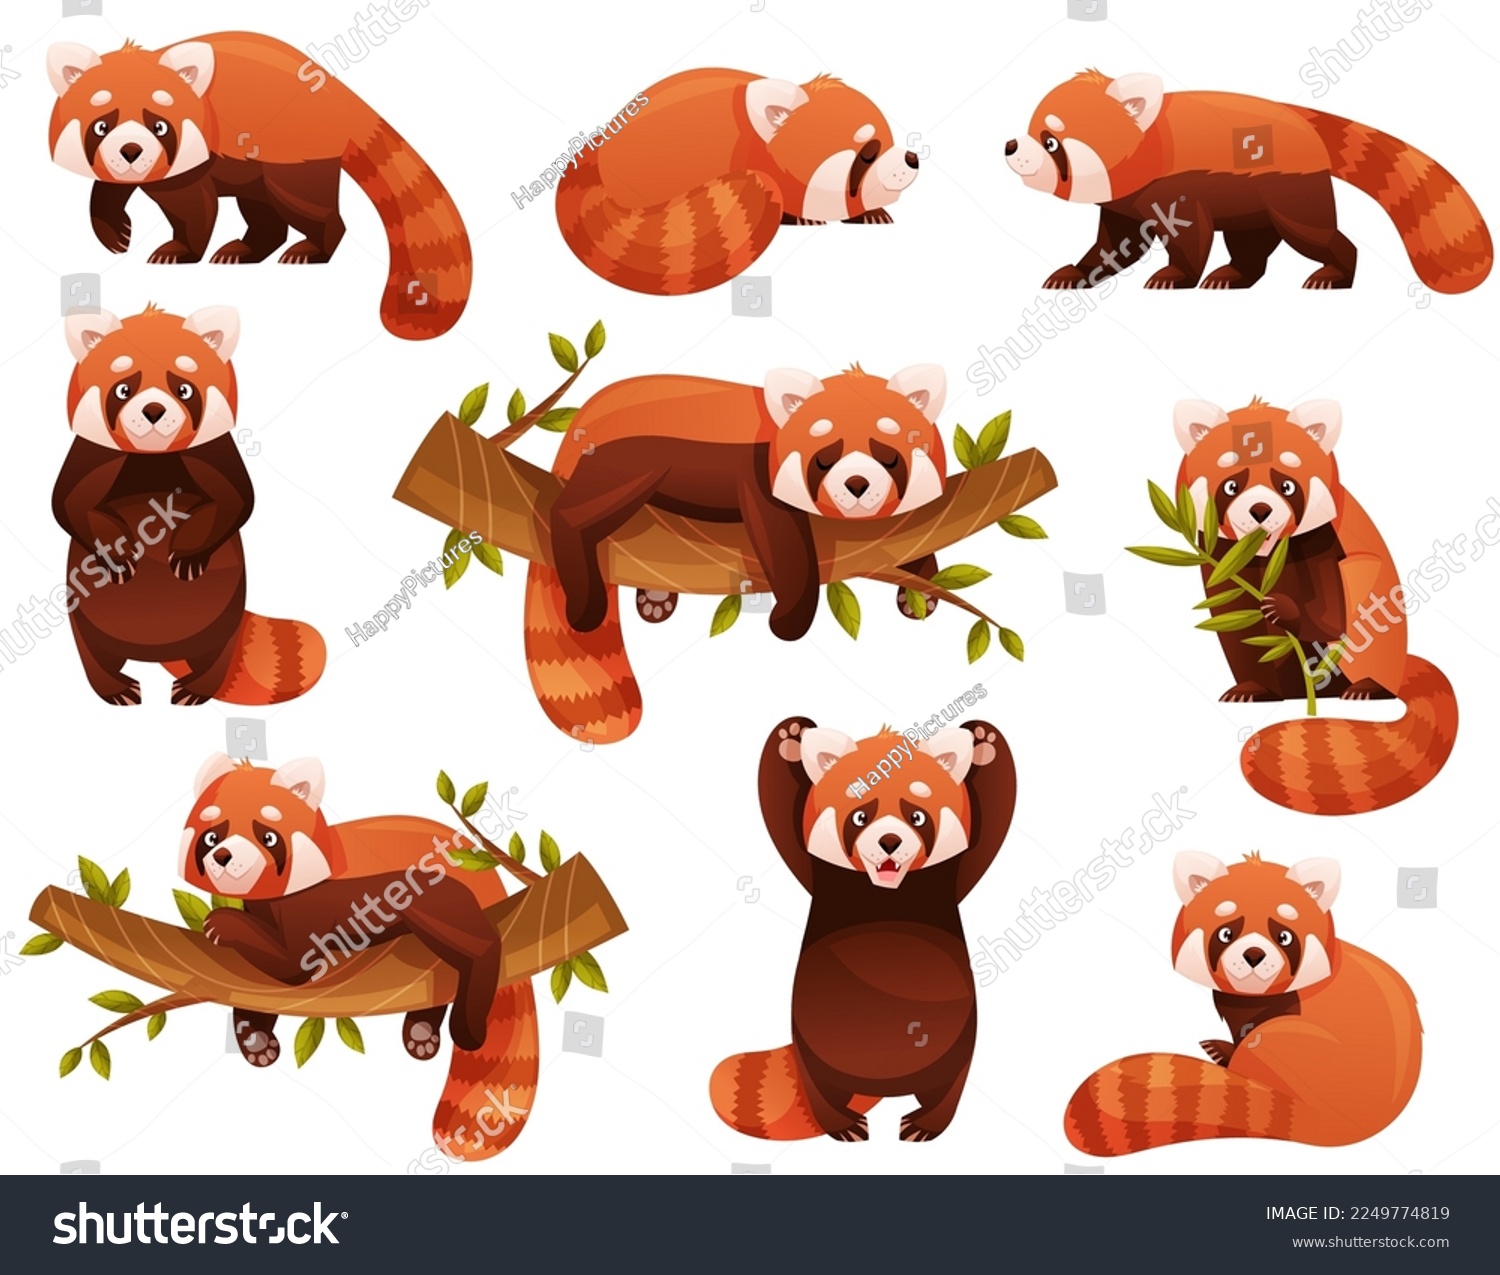 SVG of Adorable Red Panda as Small Fluffy Mammal with Dense Reddish-brown Fur and Ringed Tail in Different Pose Vector Set svg